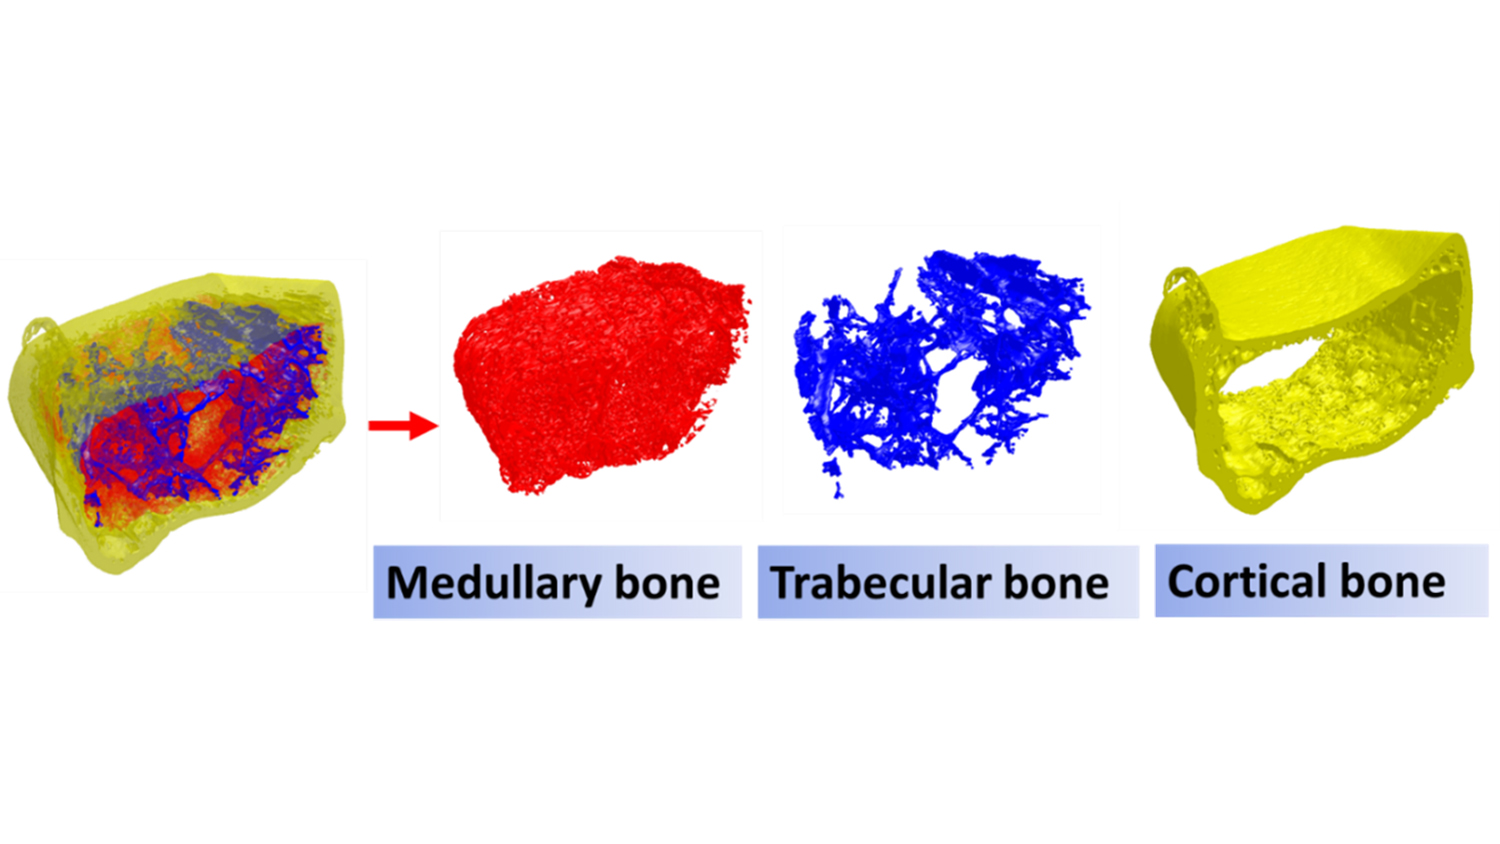 3-D rendering showing medullary, trabecular and cortical bone separated out